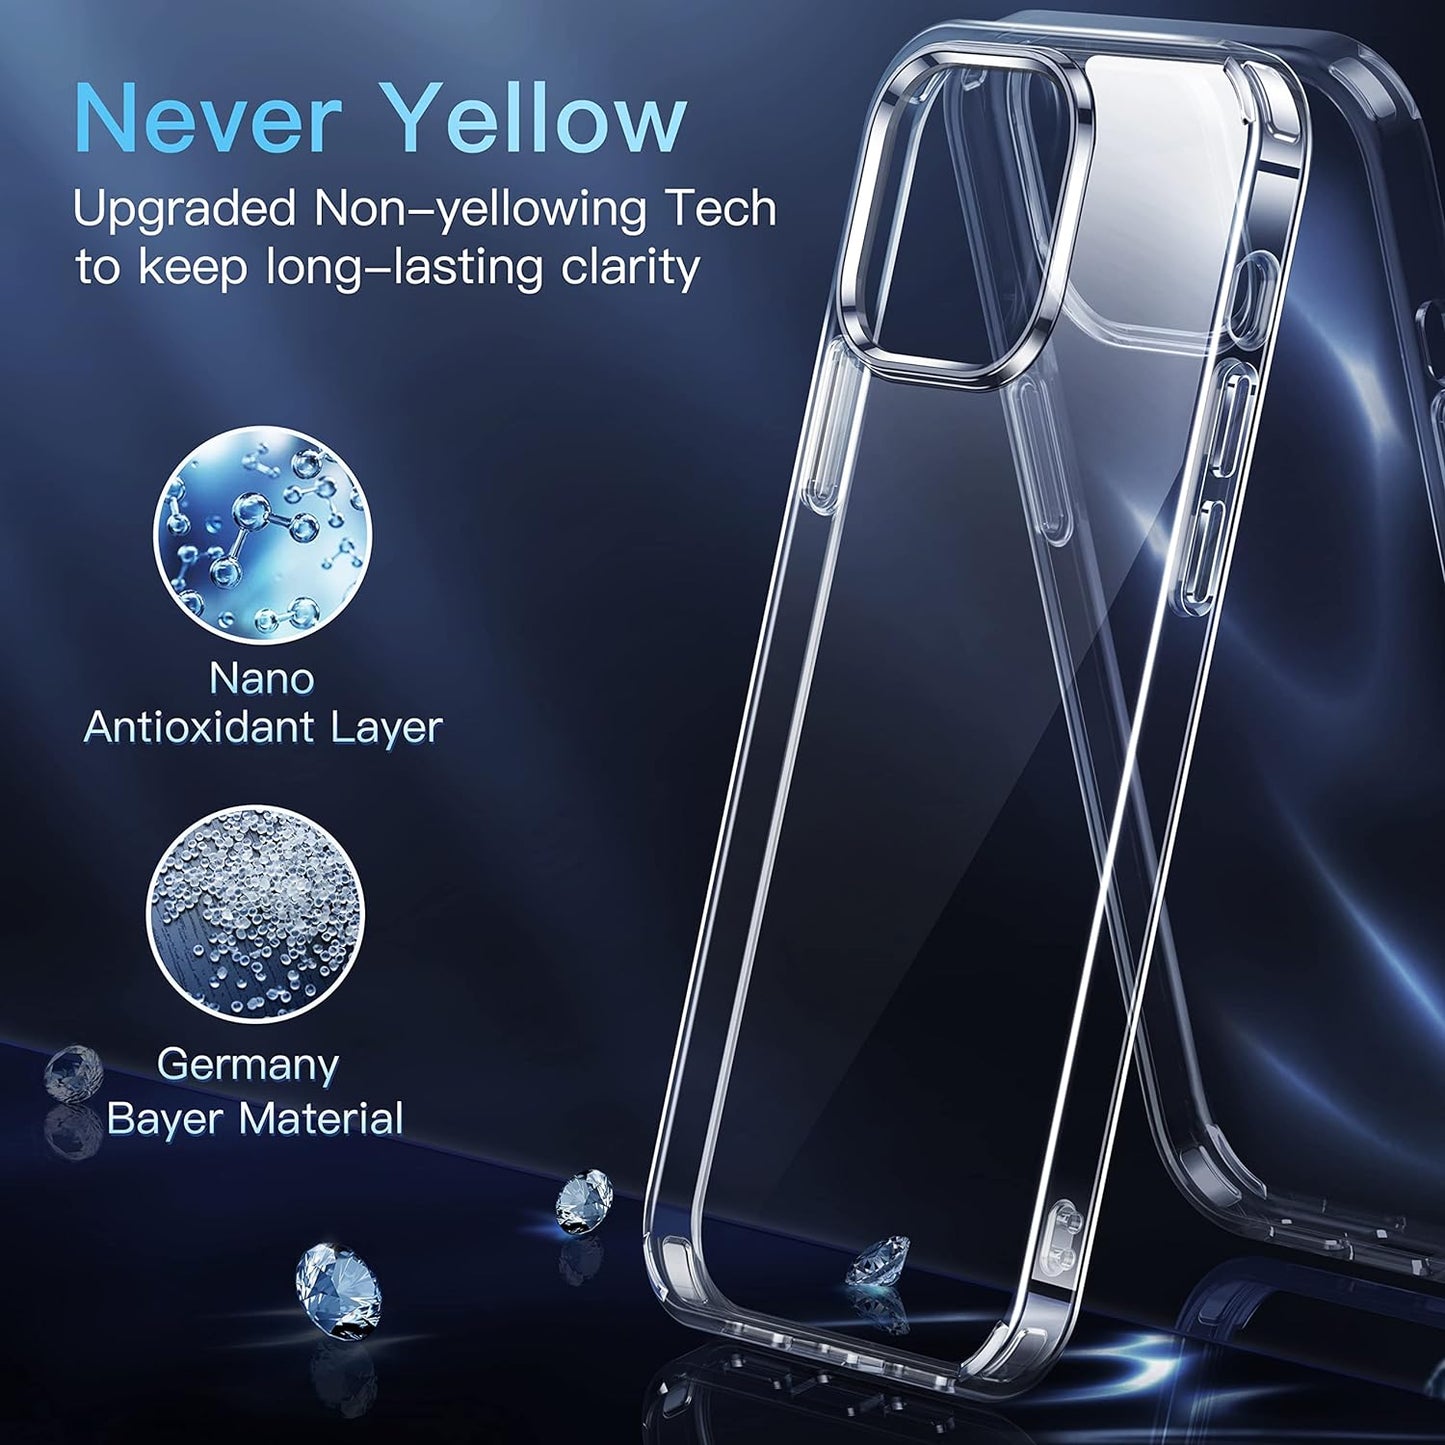 SIKAI case for iPhone 13 Pro Case Crystal Clear, [Not Yellowing] [Military Drop Protection] Shockproof Protective for iPhone 13 Pro Phone Case 6.1 inch 2021, Clear